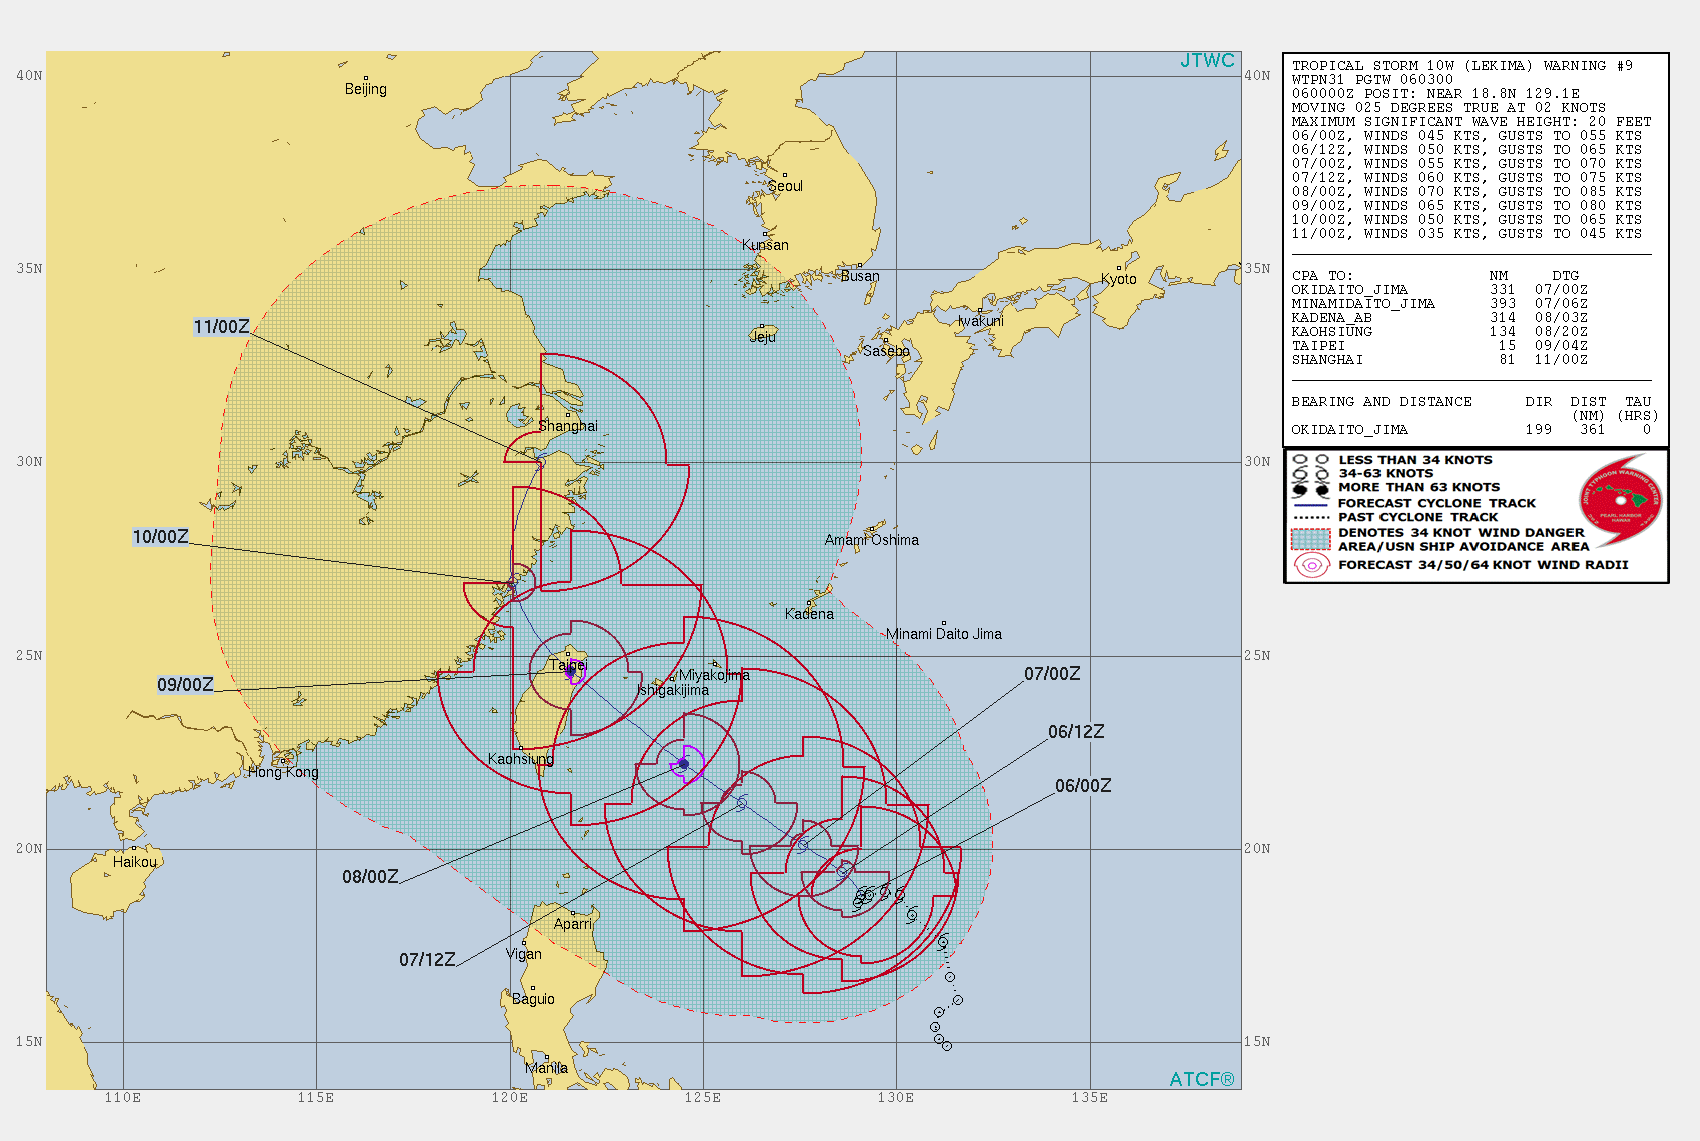 WARNING 9. LEKIMA(10W) IS ONCE AGAIN FORECAST TO REACH TYPHOON INTENSITY IN 48H.